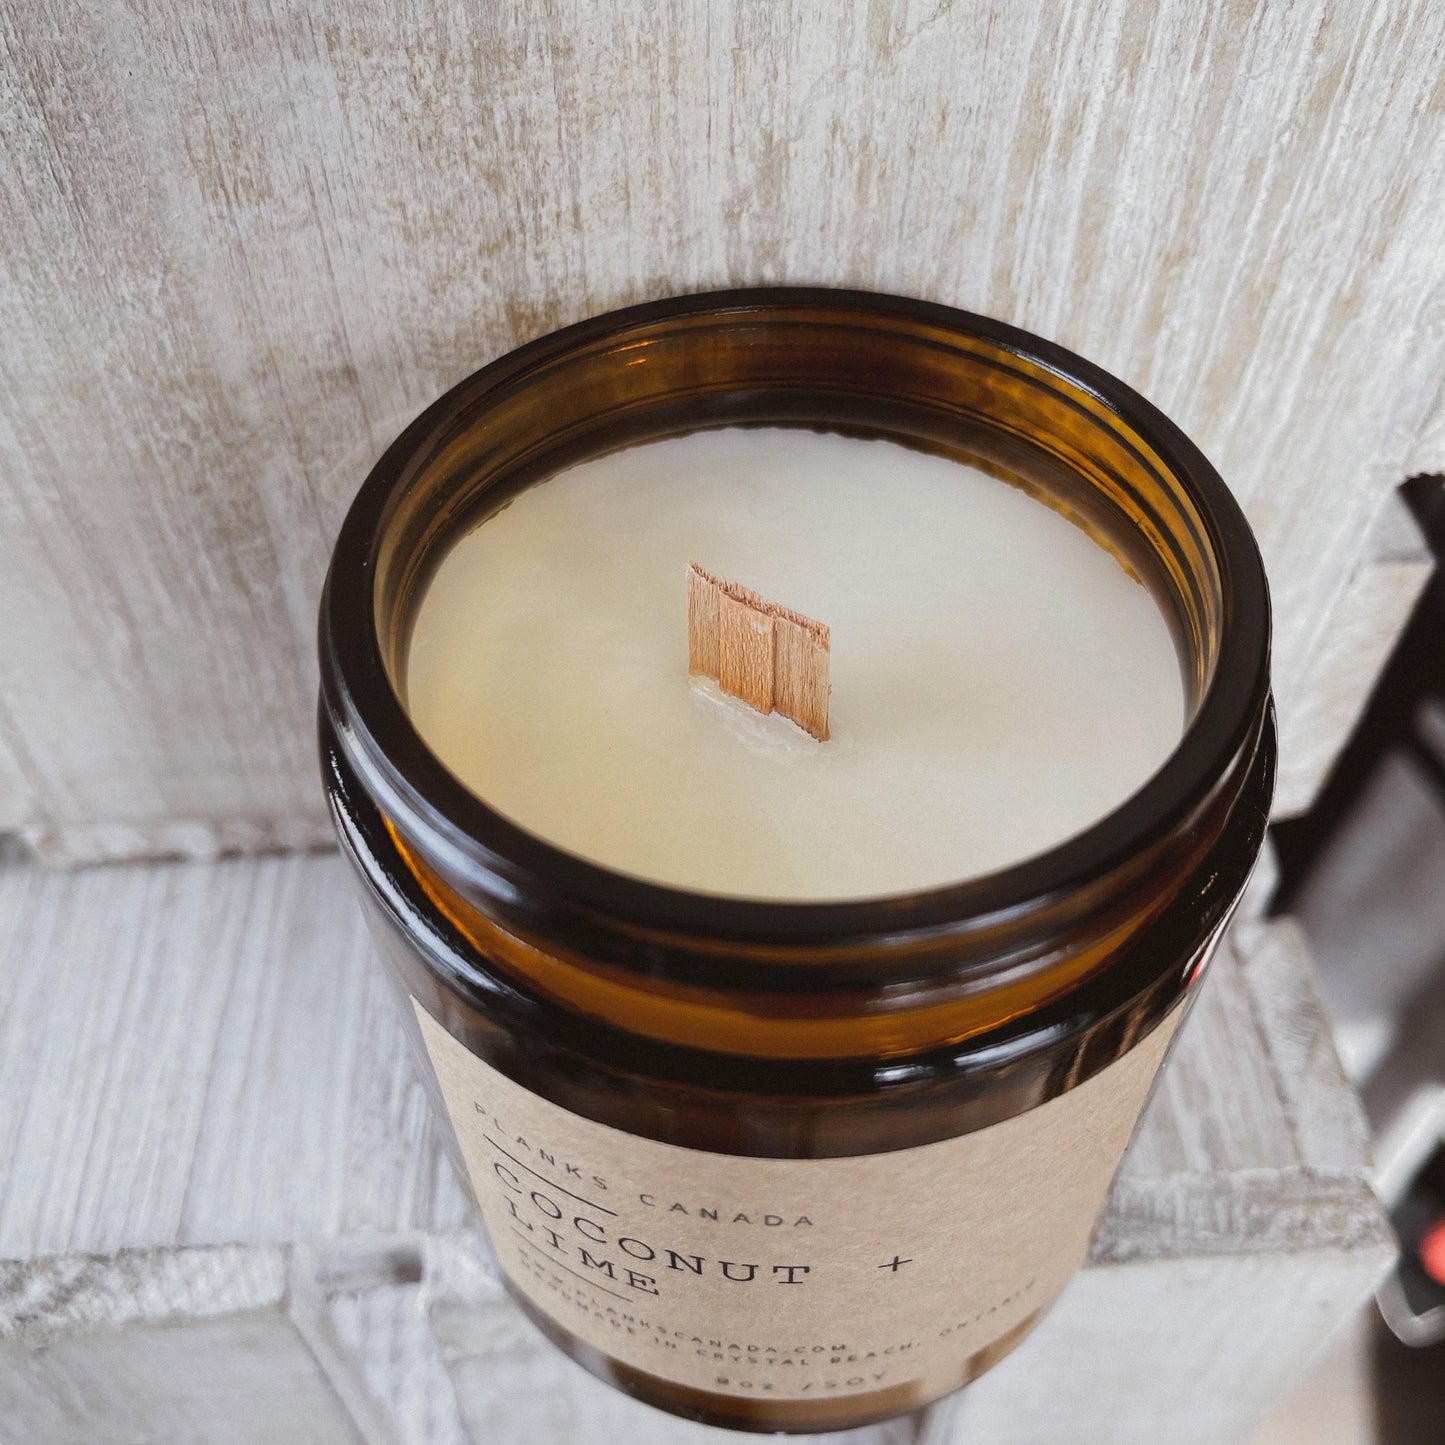 Cottage Clean - Wood Wick Soy Candle